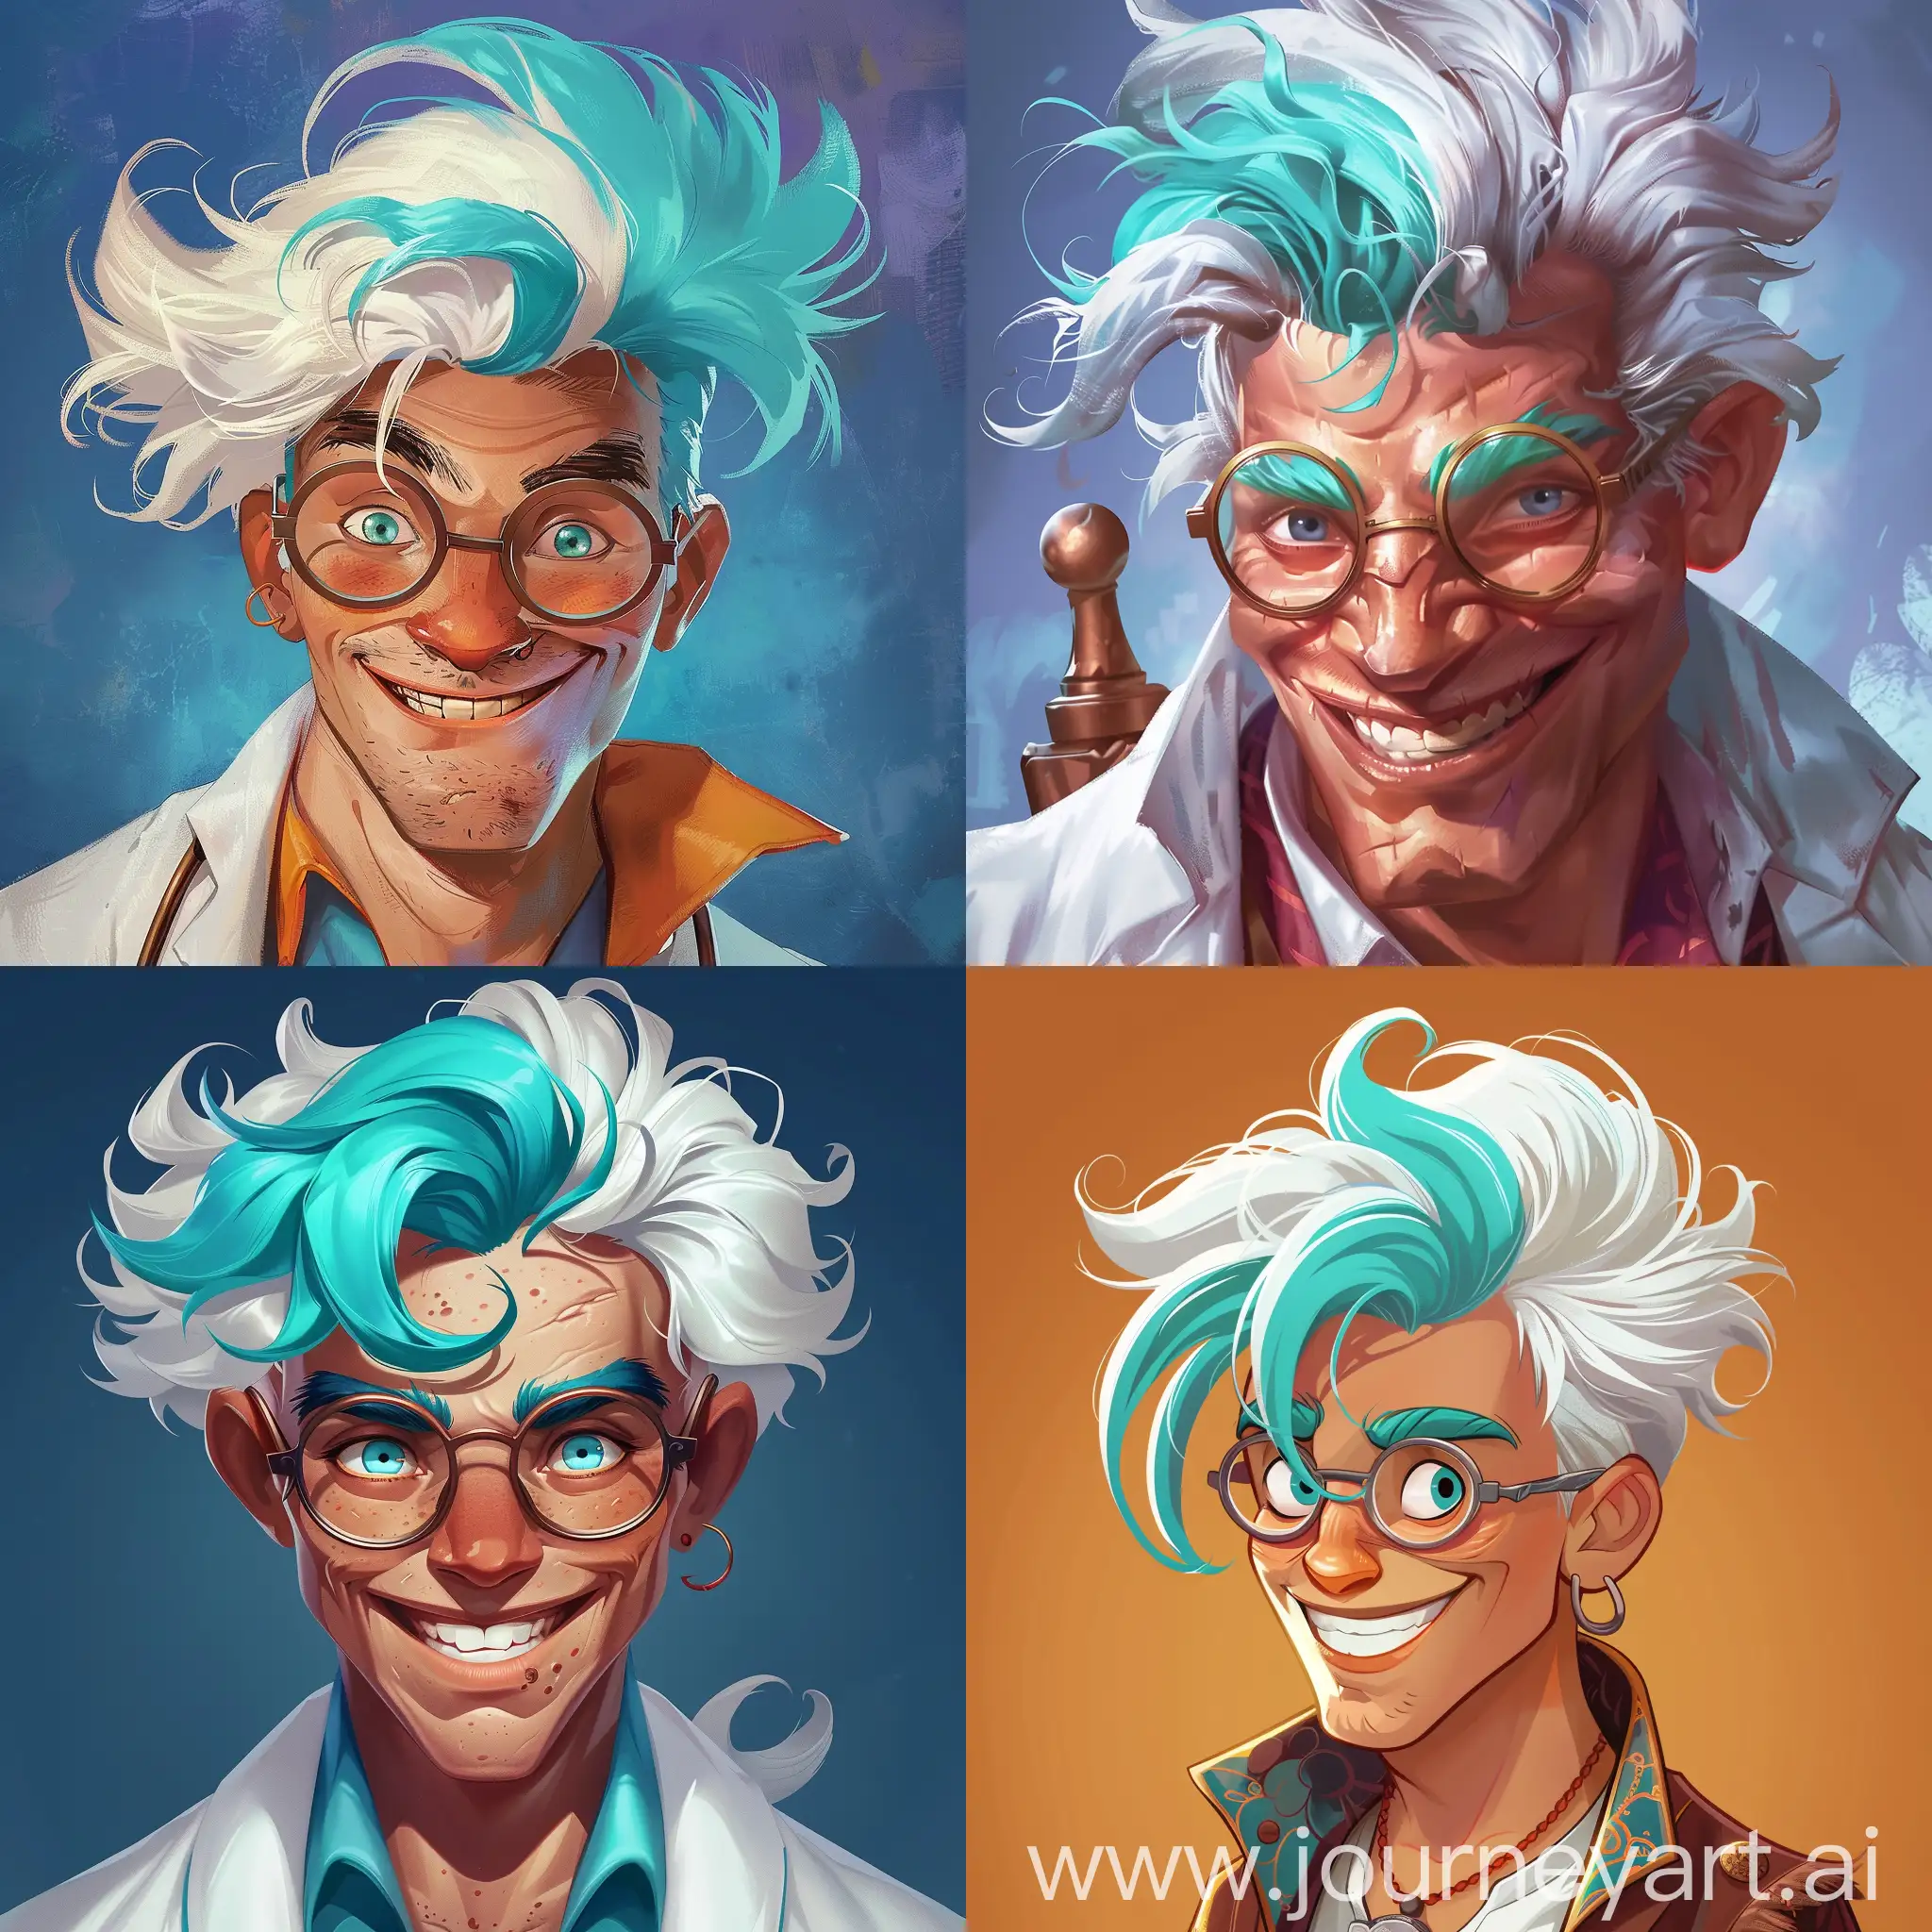 Handsome-Genius-Doctor-Stone-with-White-Turquoise-Hair-Sharing-Worldly-Knowledge